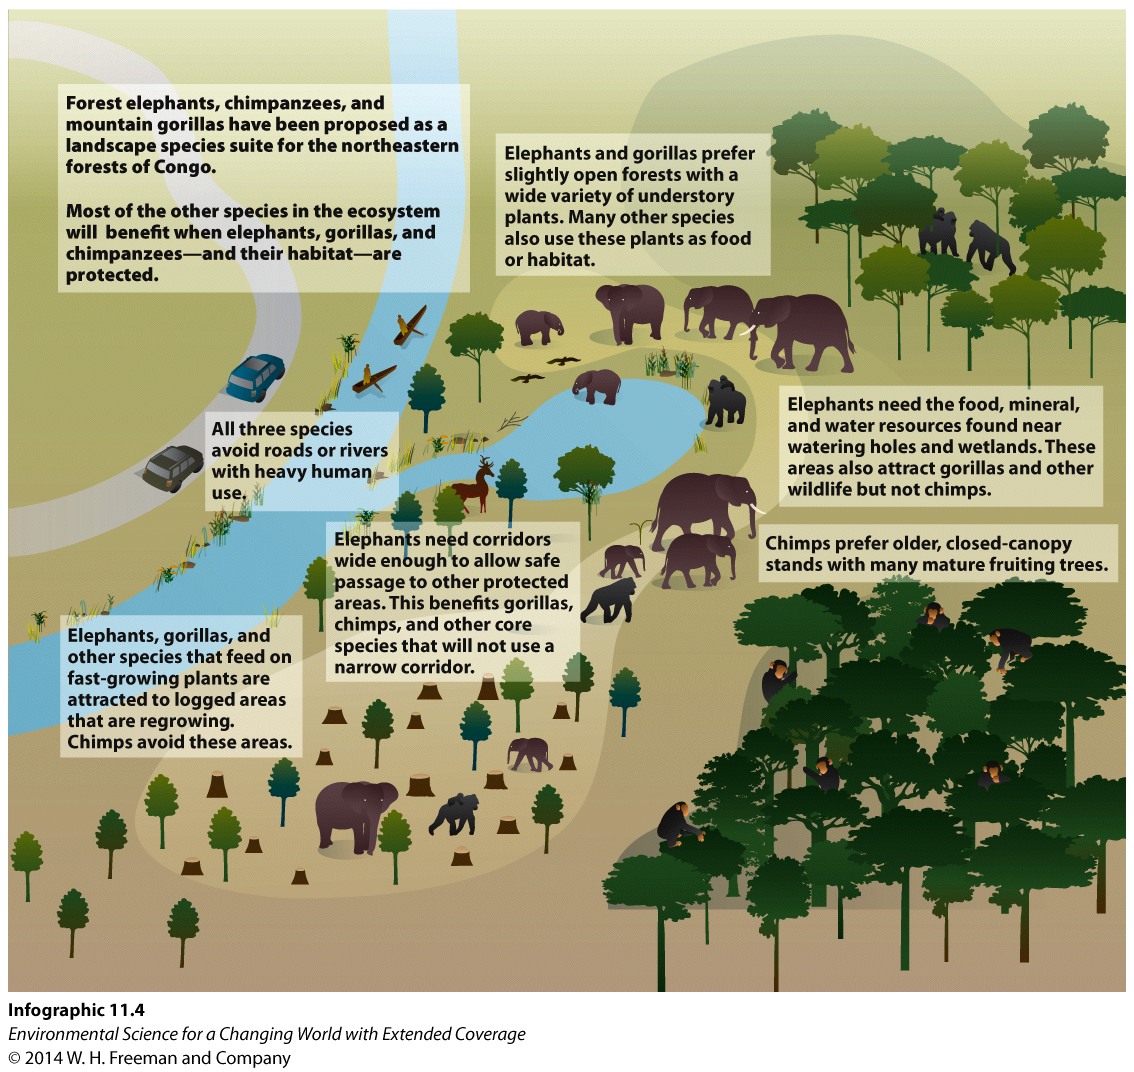 Infographic 11.4: Species Conservation: An Ecosystem Approach